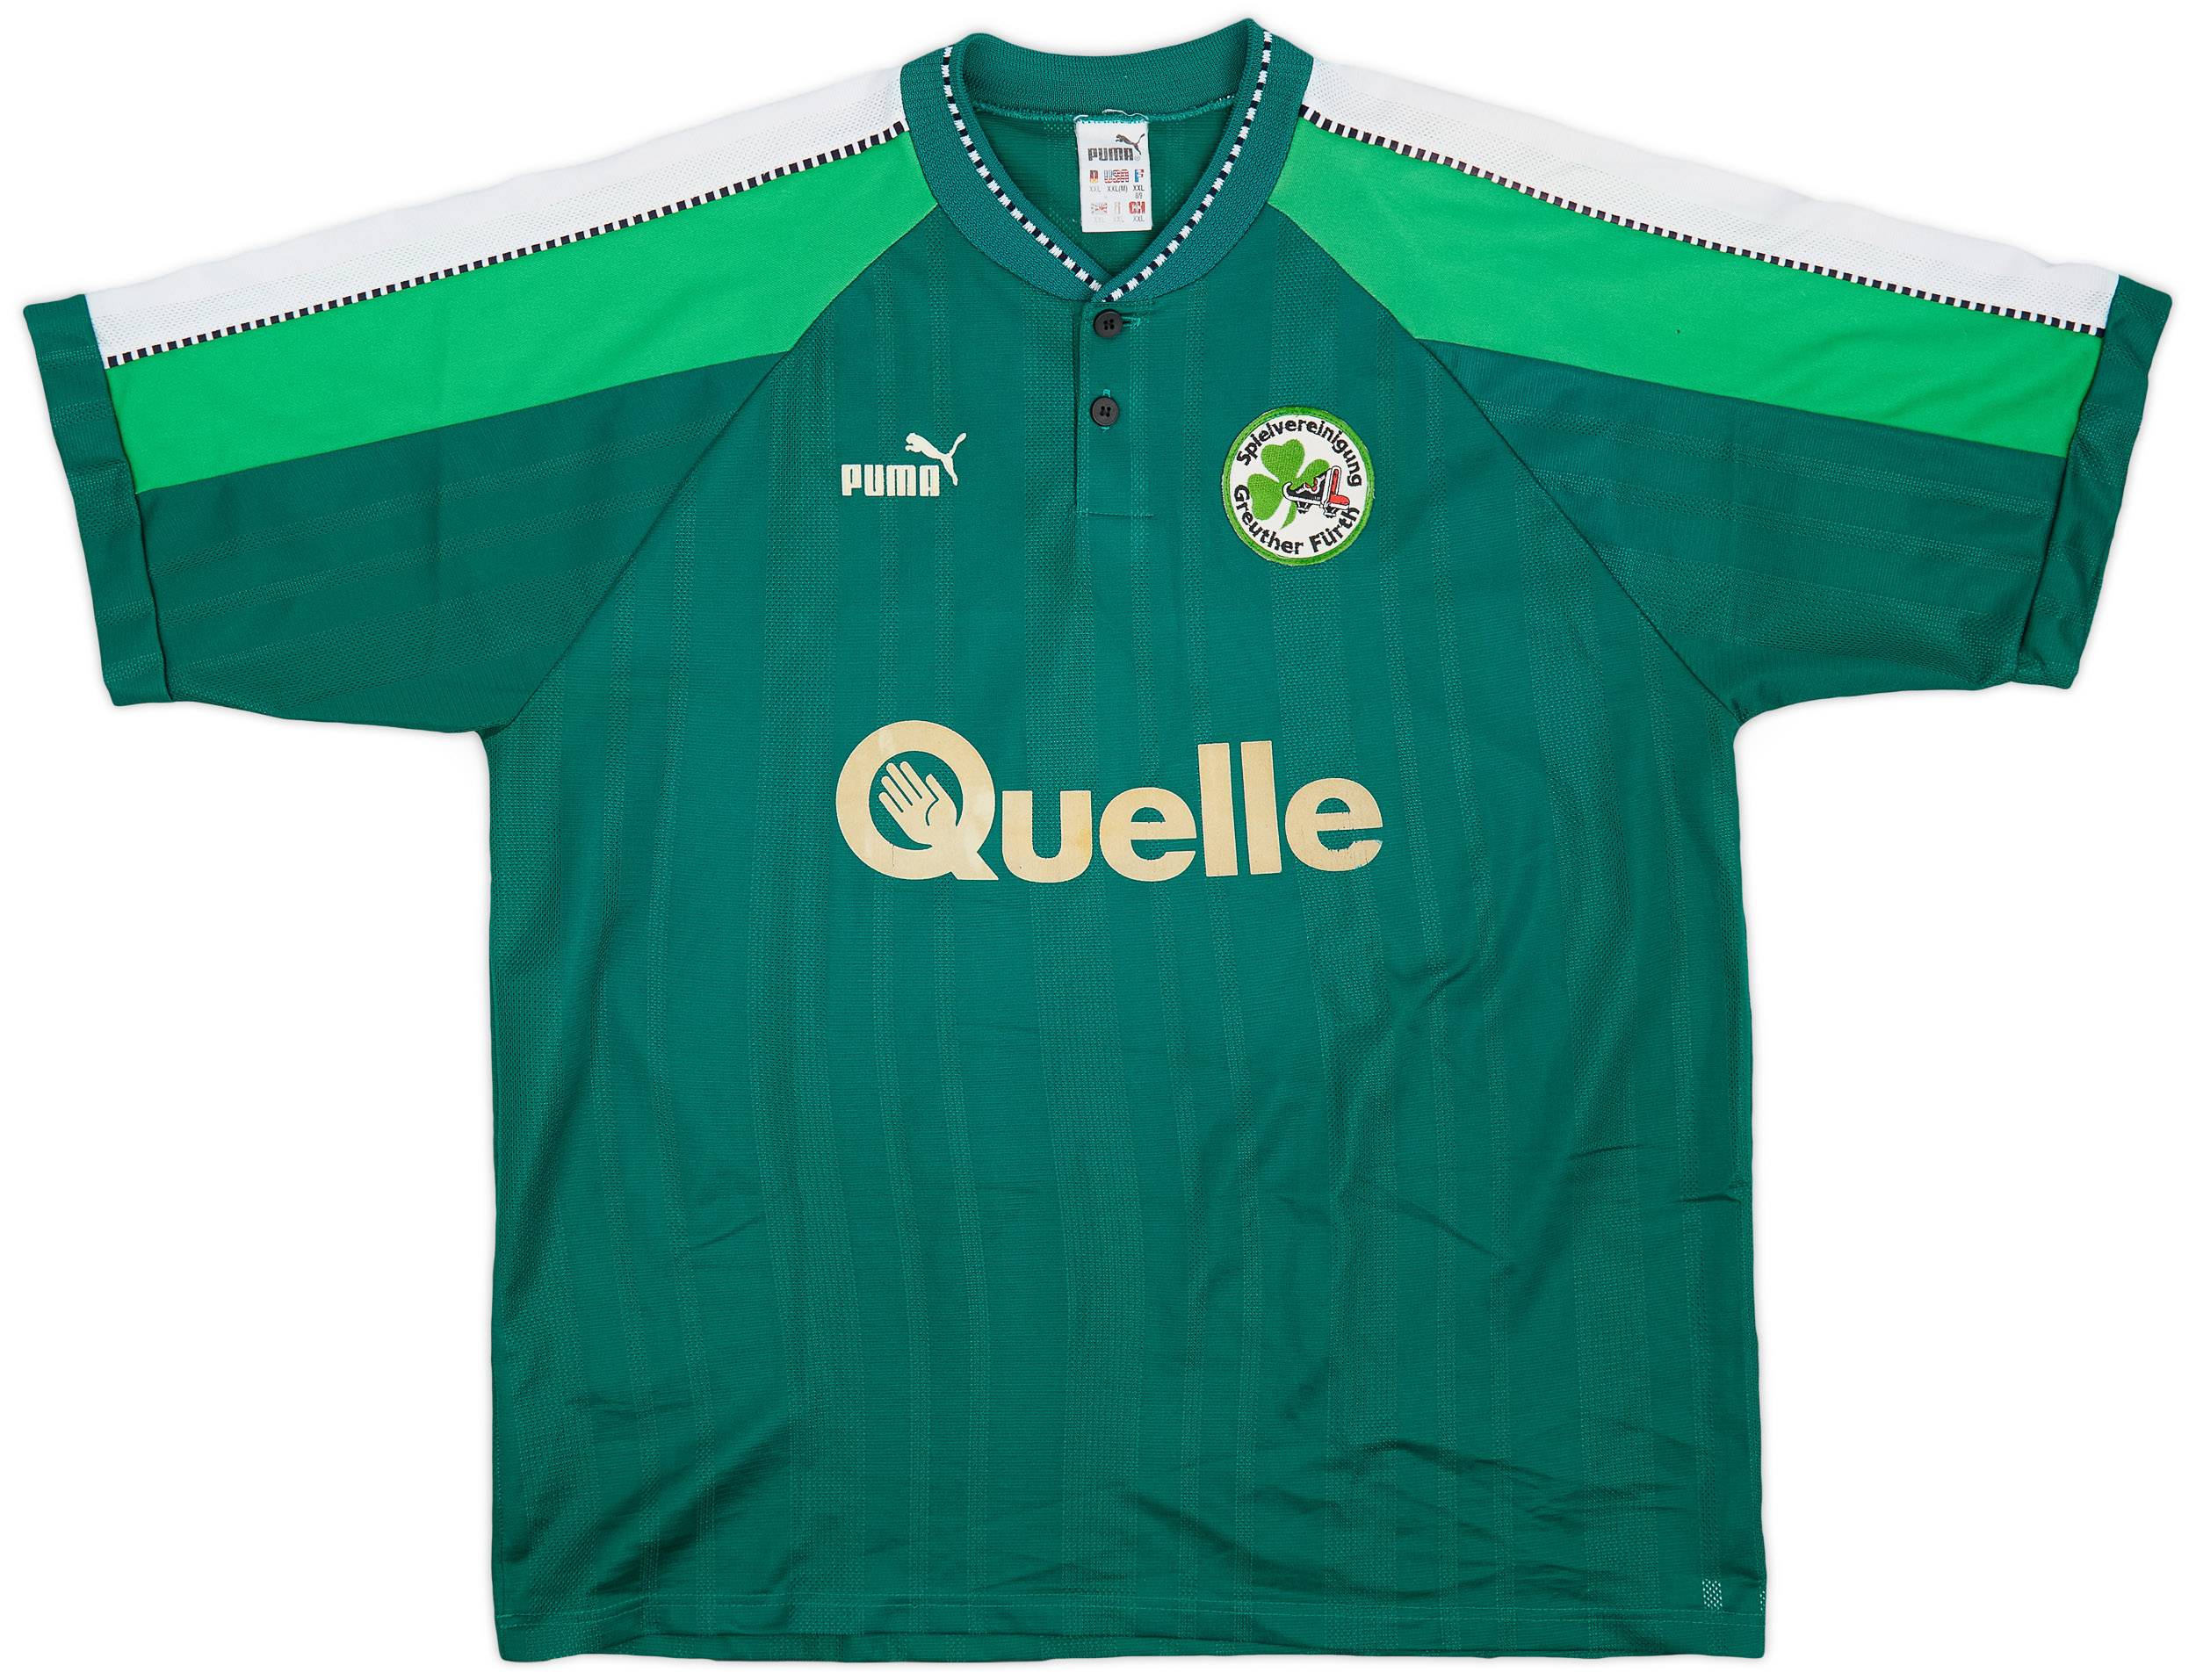 1997-98 Greuther Furth Home Shirt - 8/10 - (XXL)